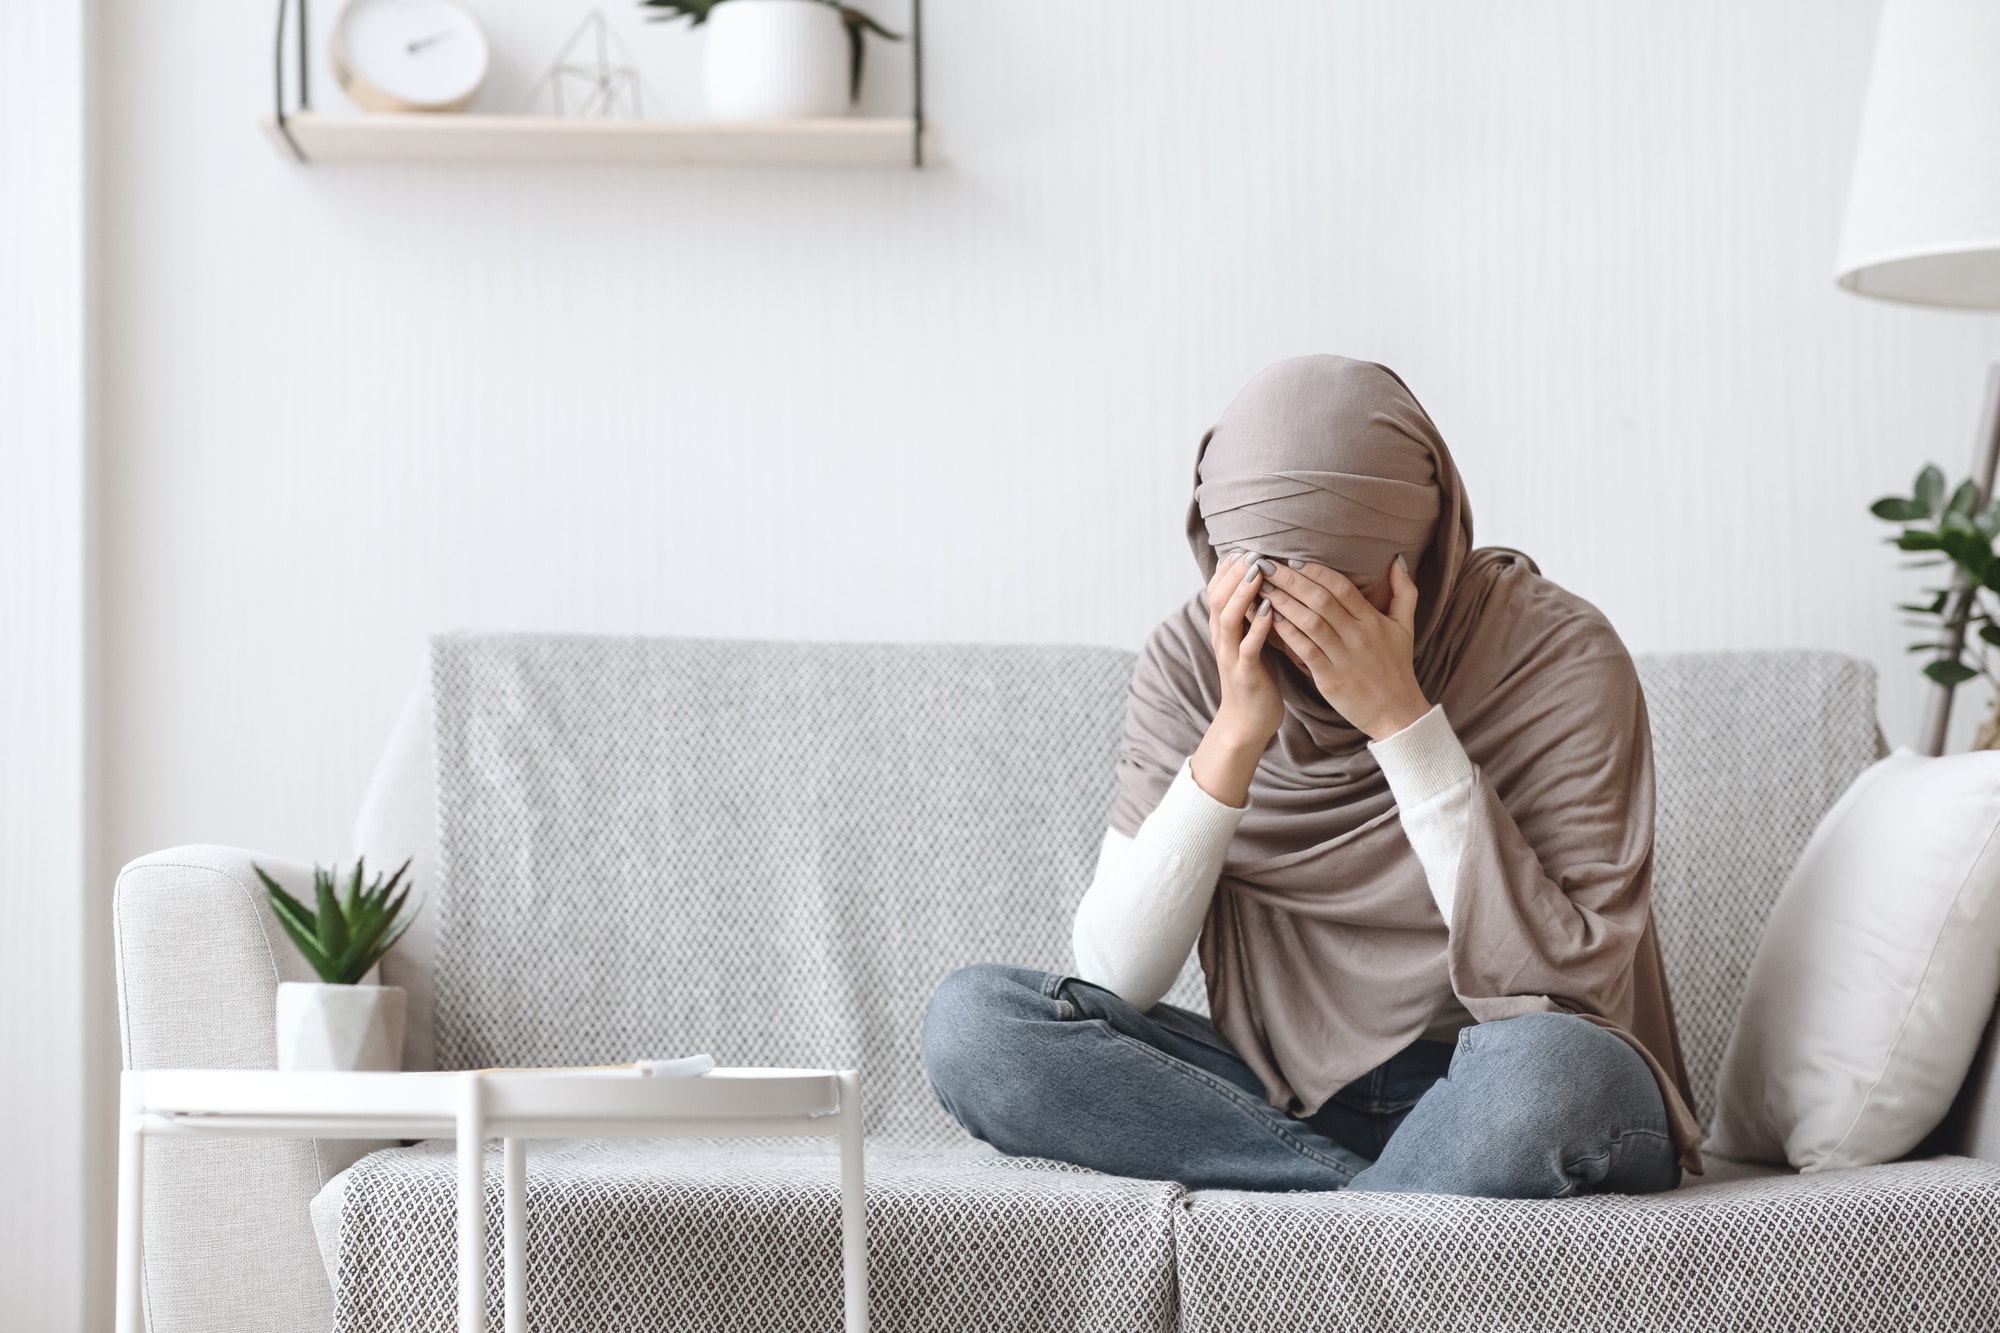 Upset muslim woman in headscarf crying on couch at home